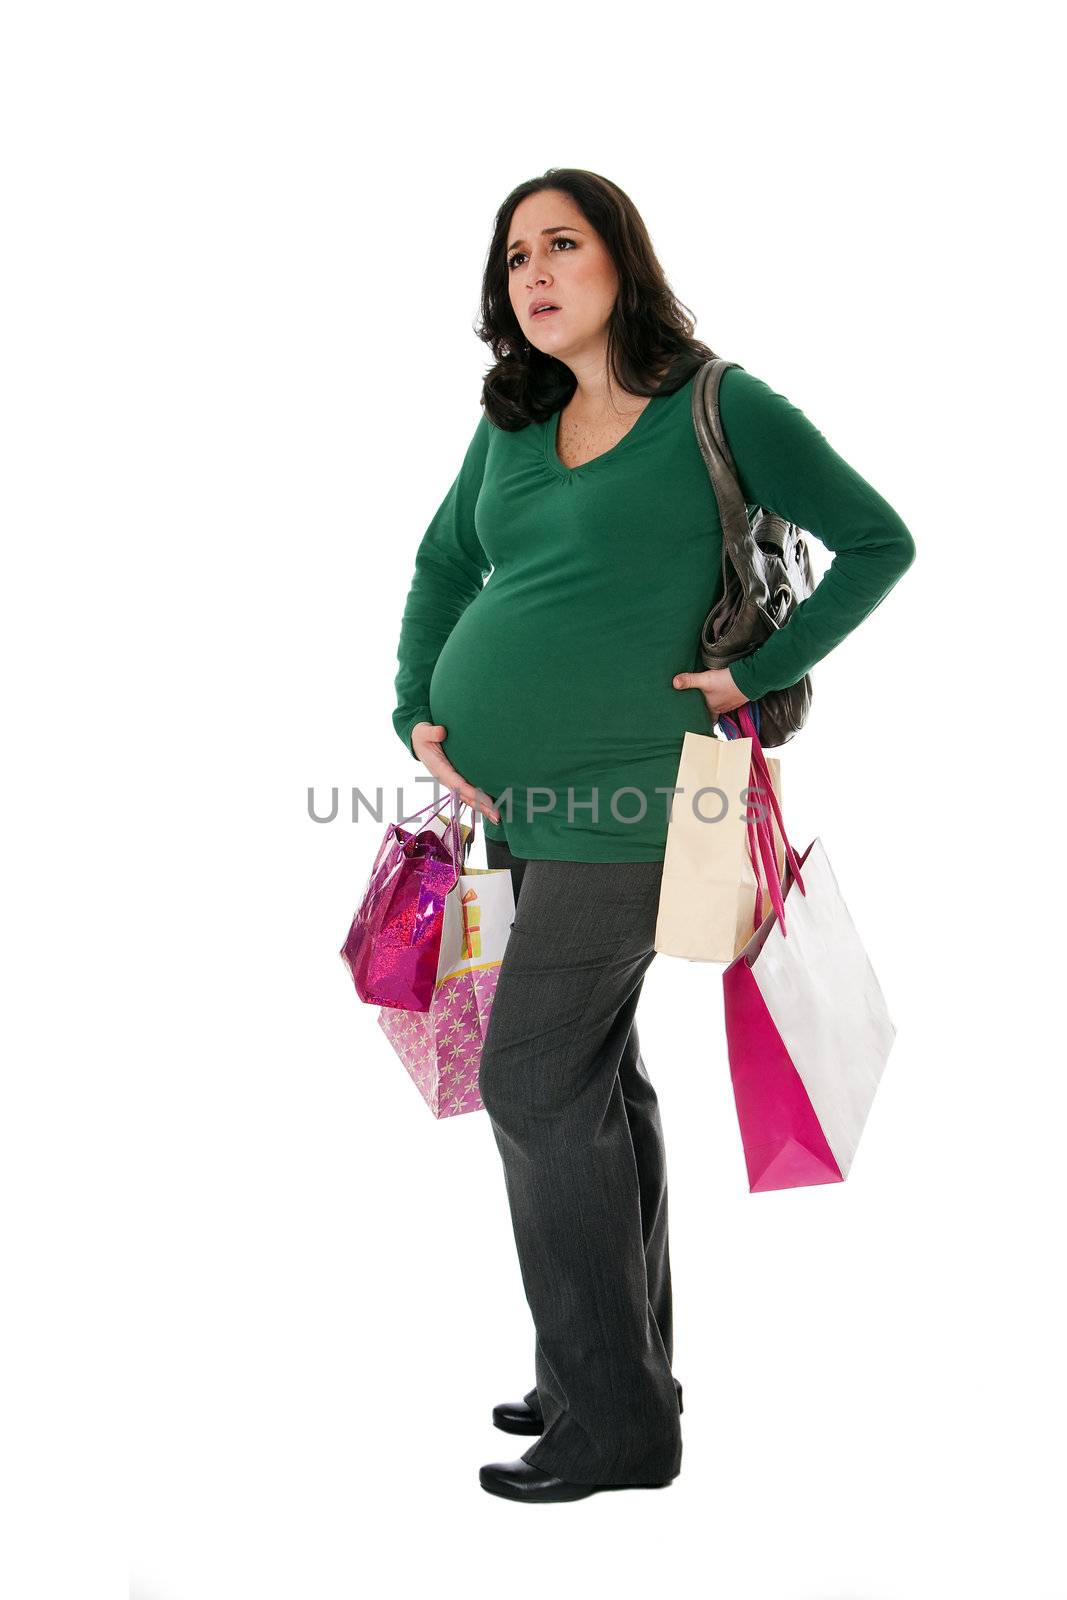 Pregnant woman with shopping bags by phakimata